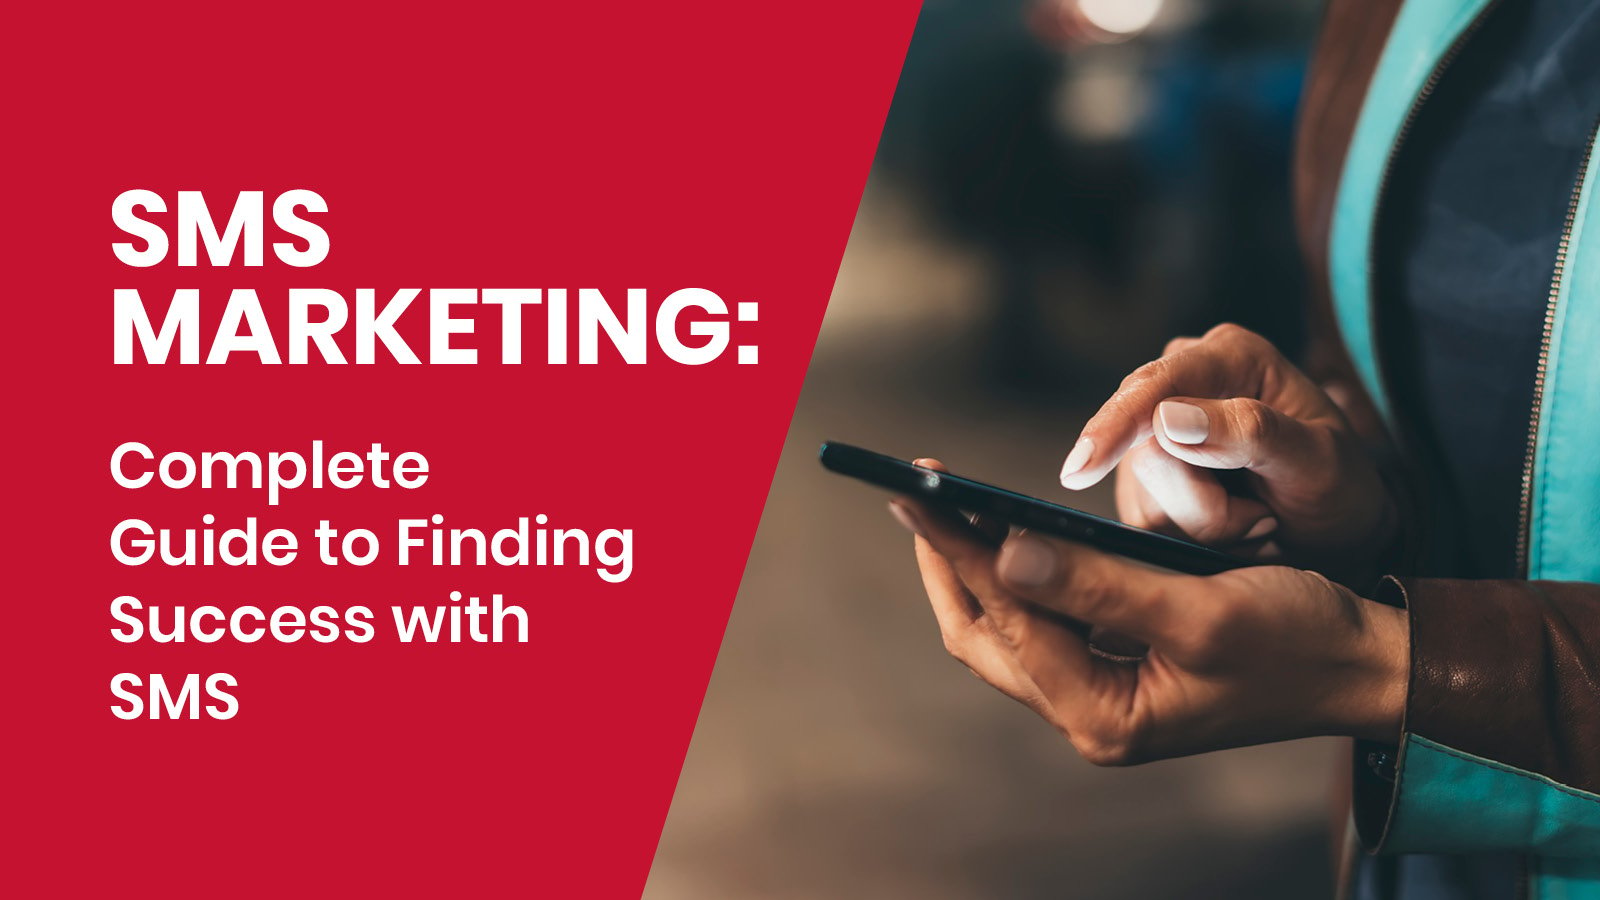 Learn about SMS strategies, best practices, and tools in this complete guide to SMS marketing.